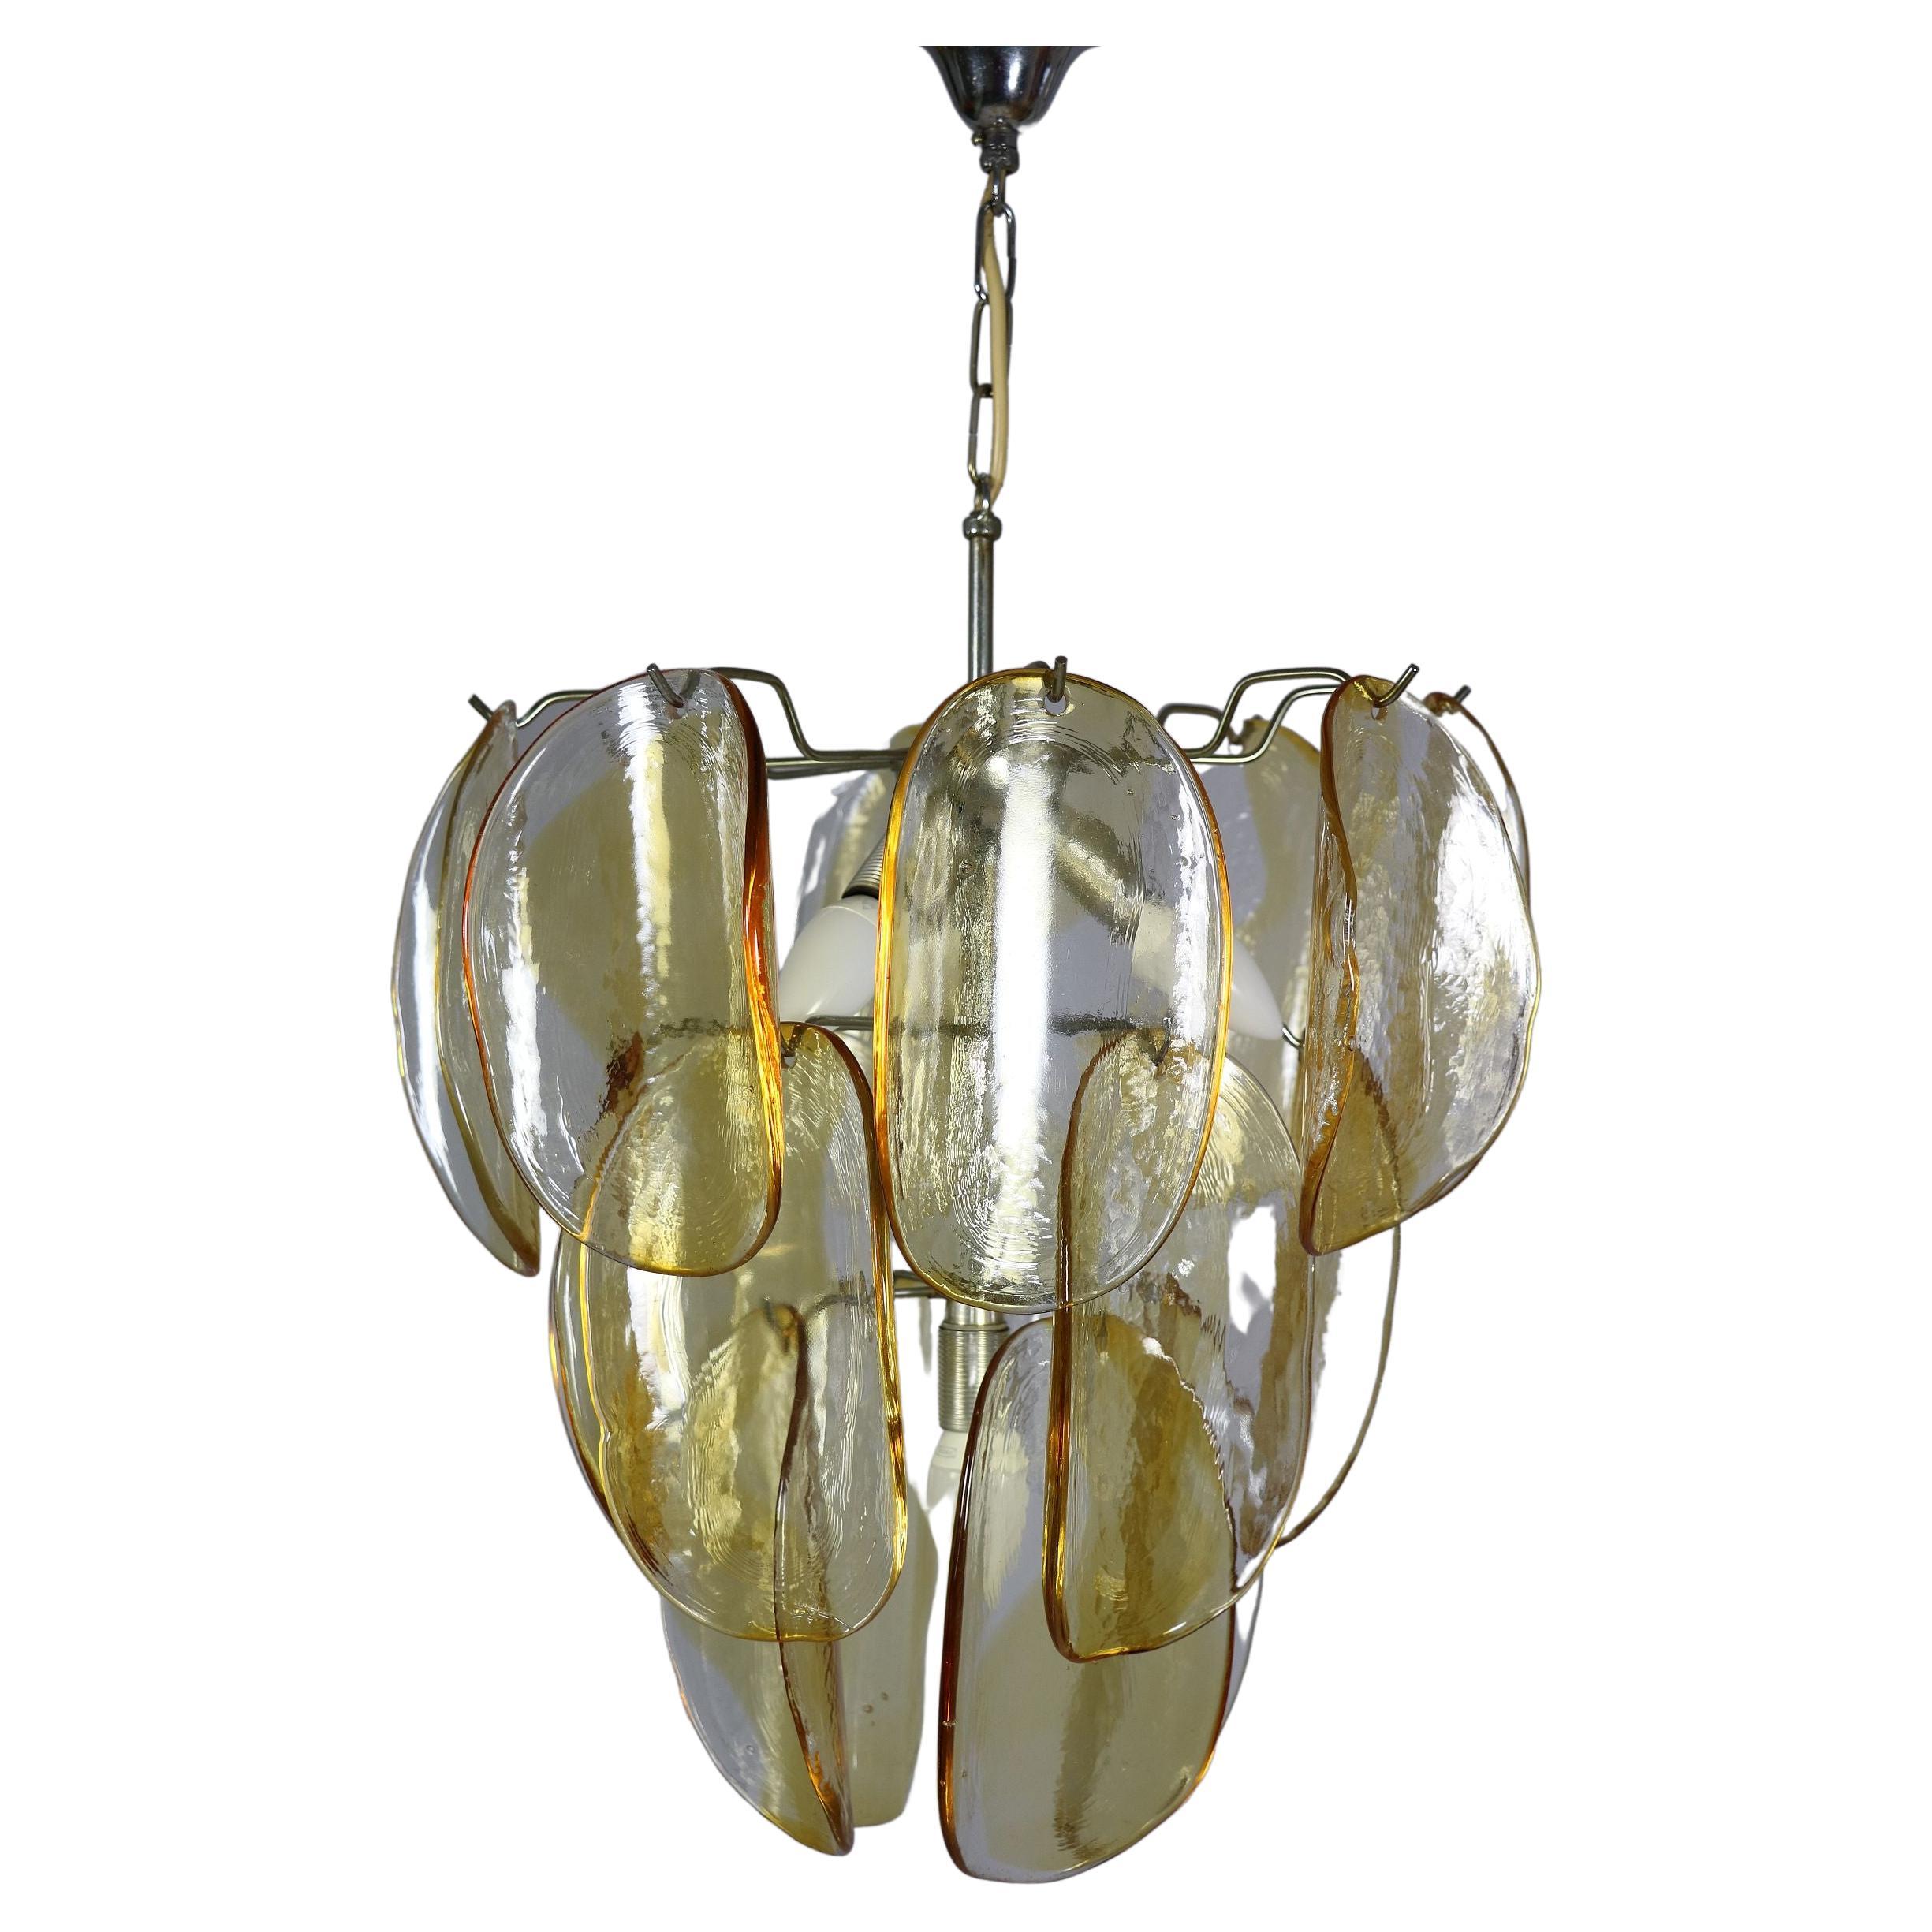 Murano Chandelier with 18 Glass Discs, Amber, Italy